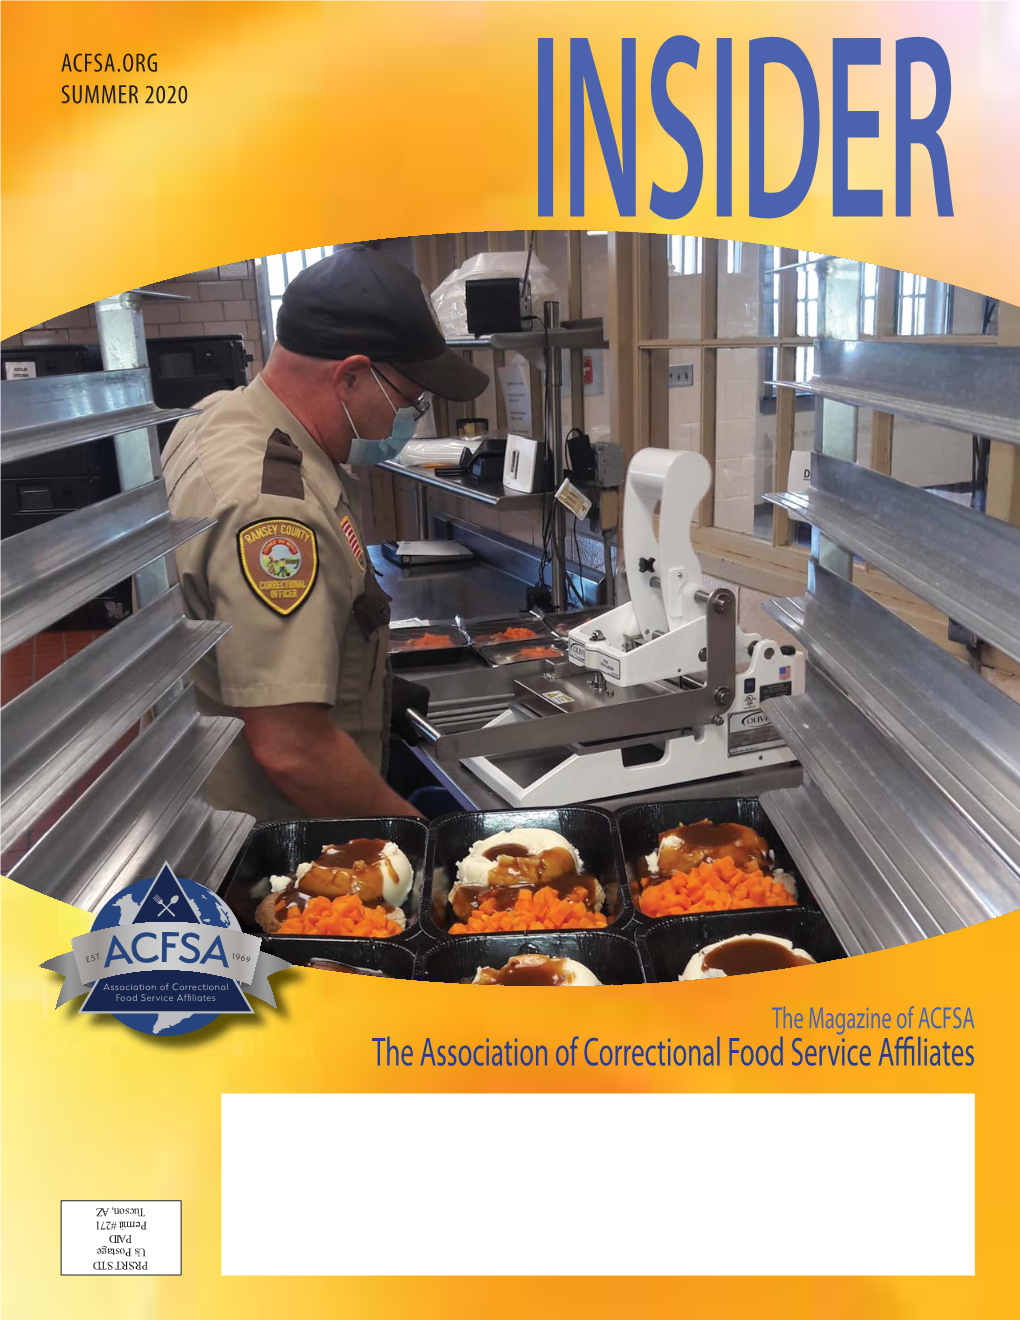 The Association of Correctional Food Service Affiliates